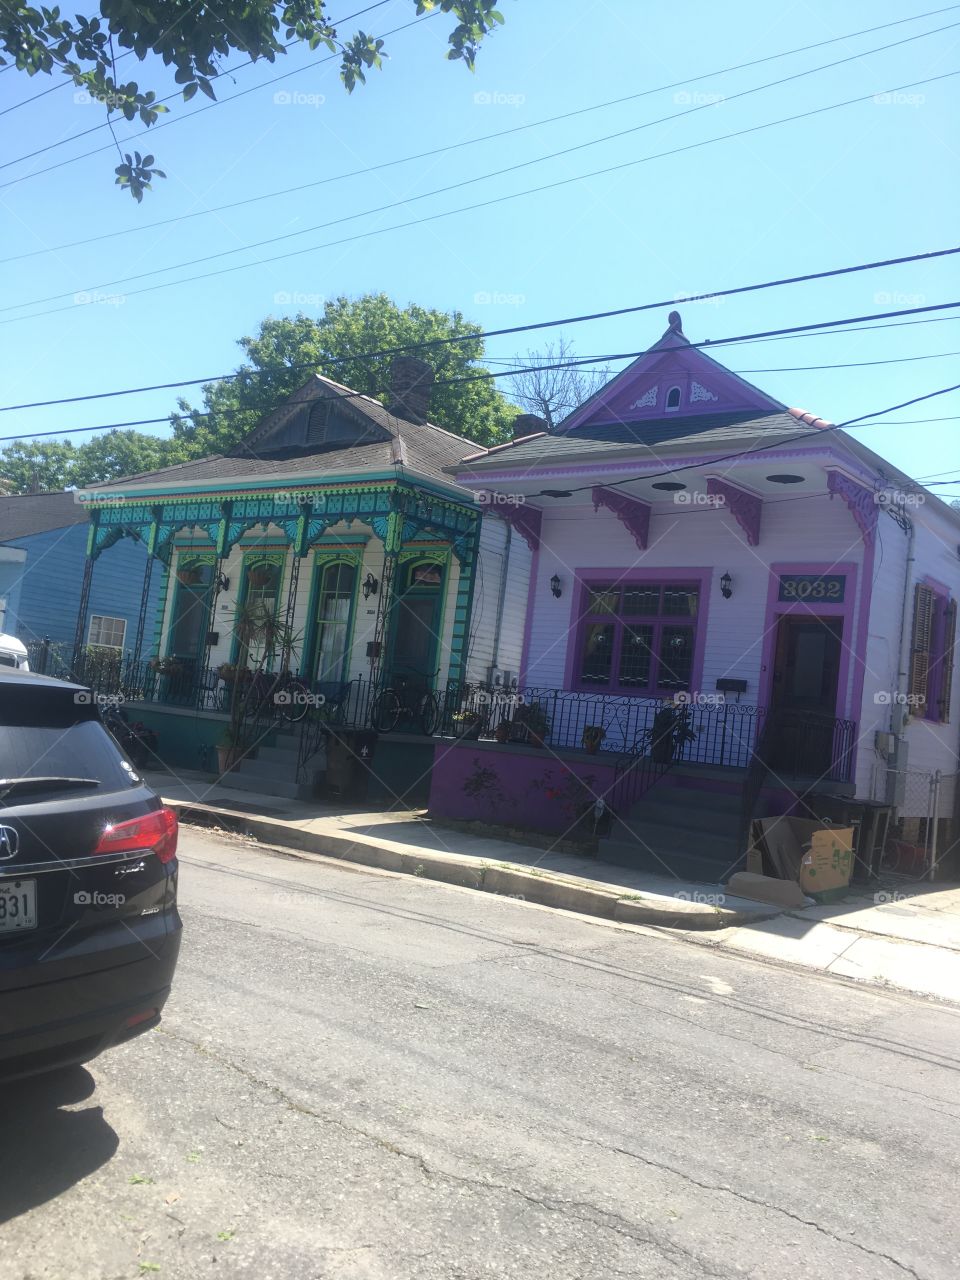 New Orleans houses